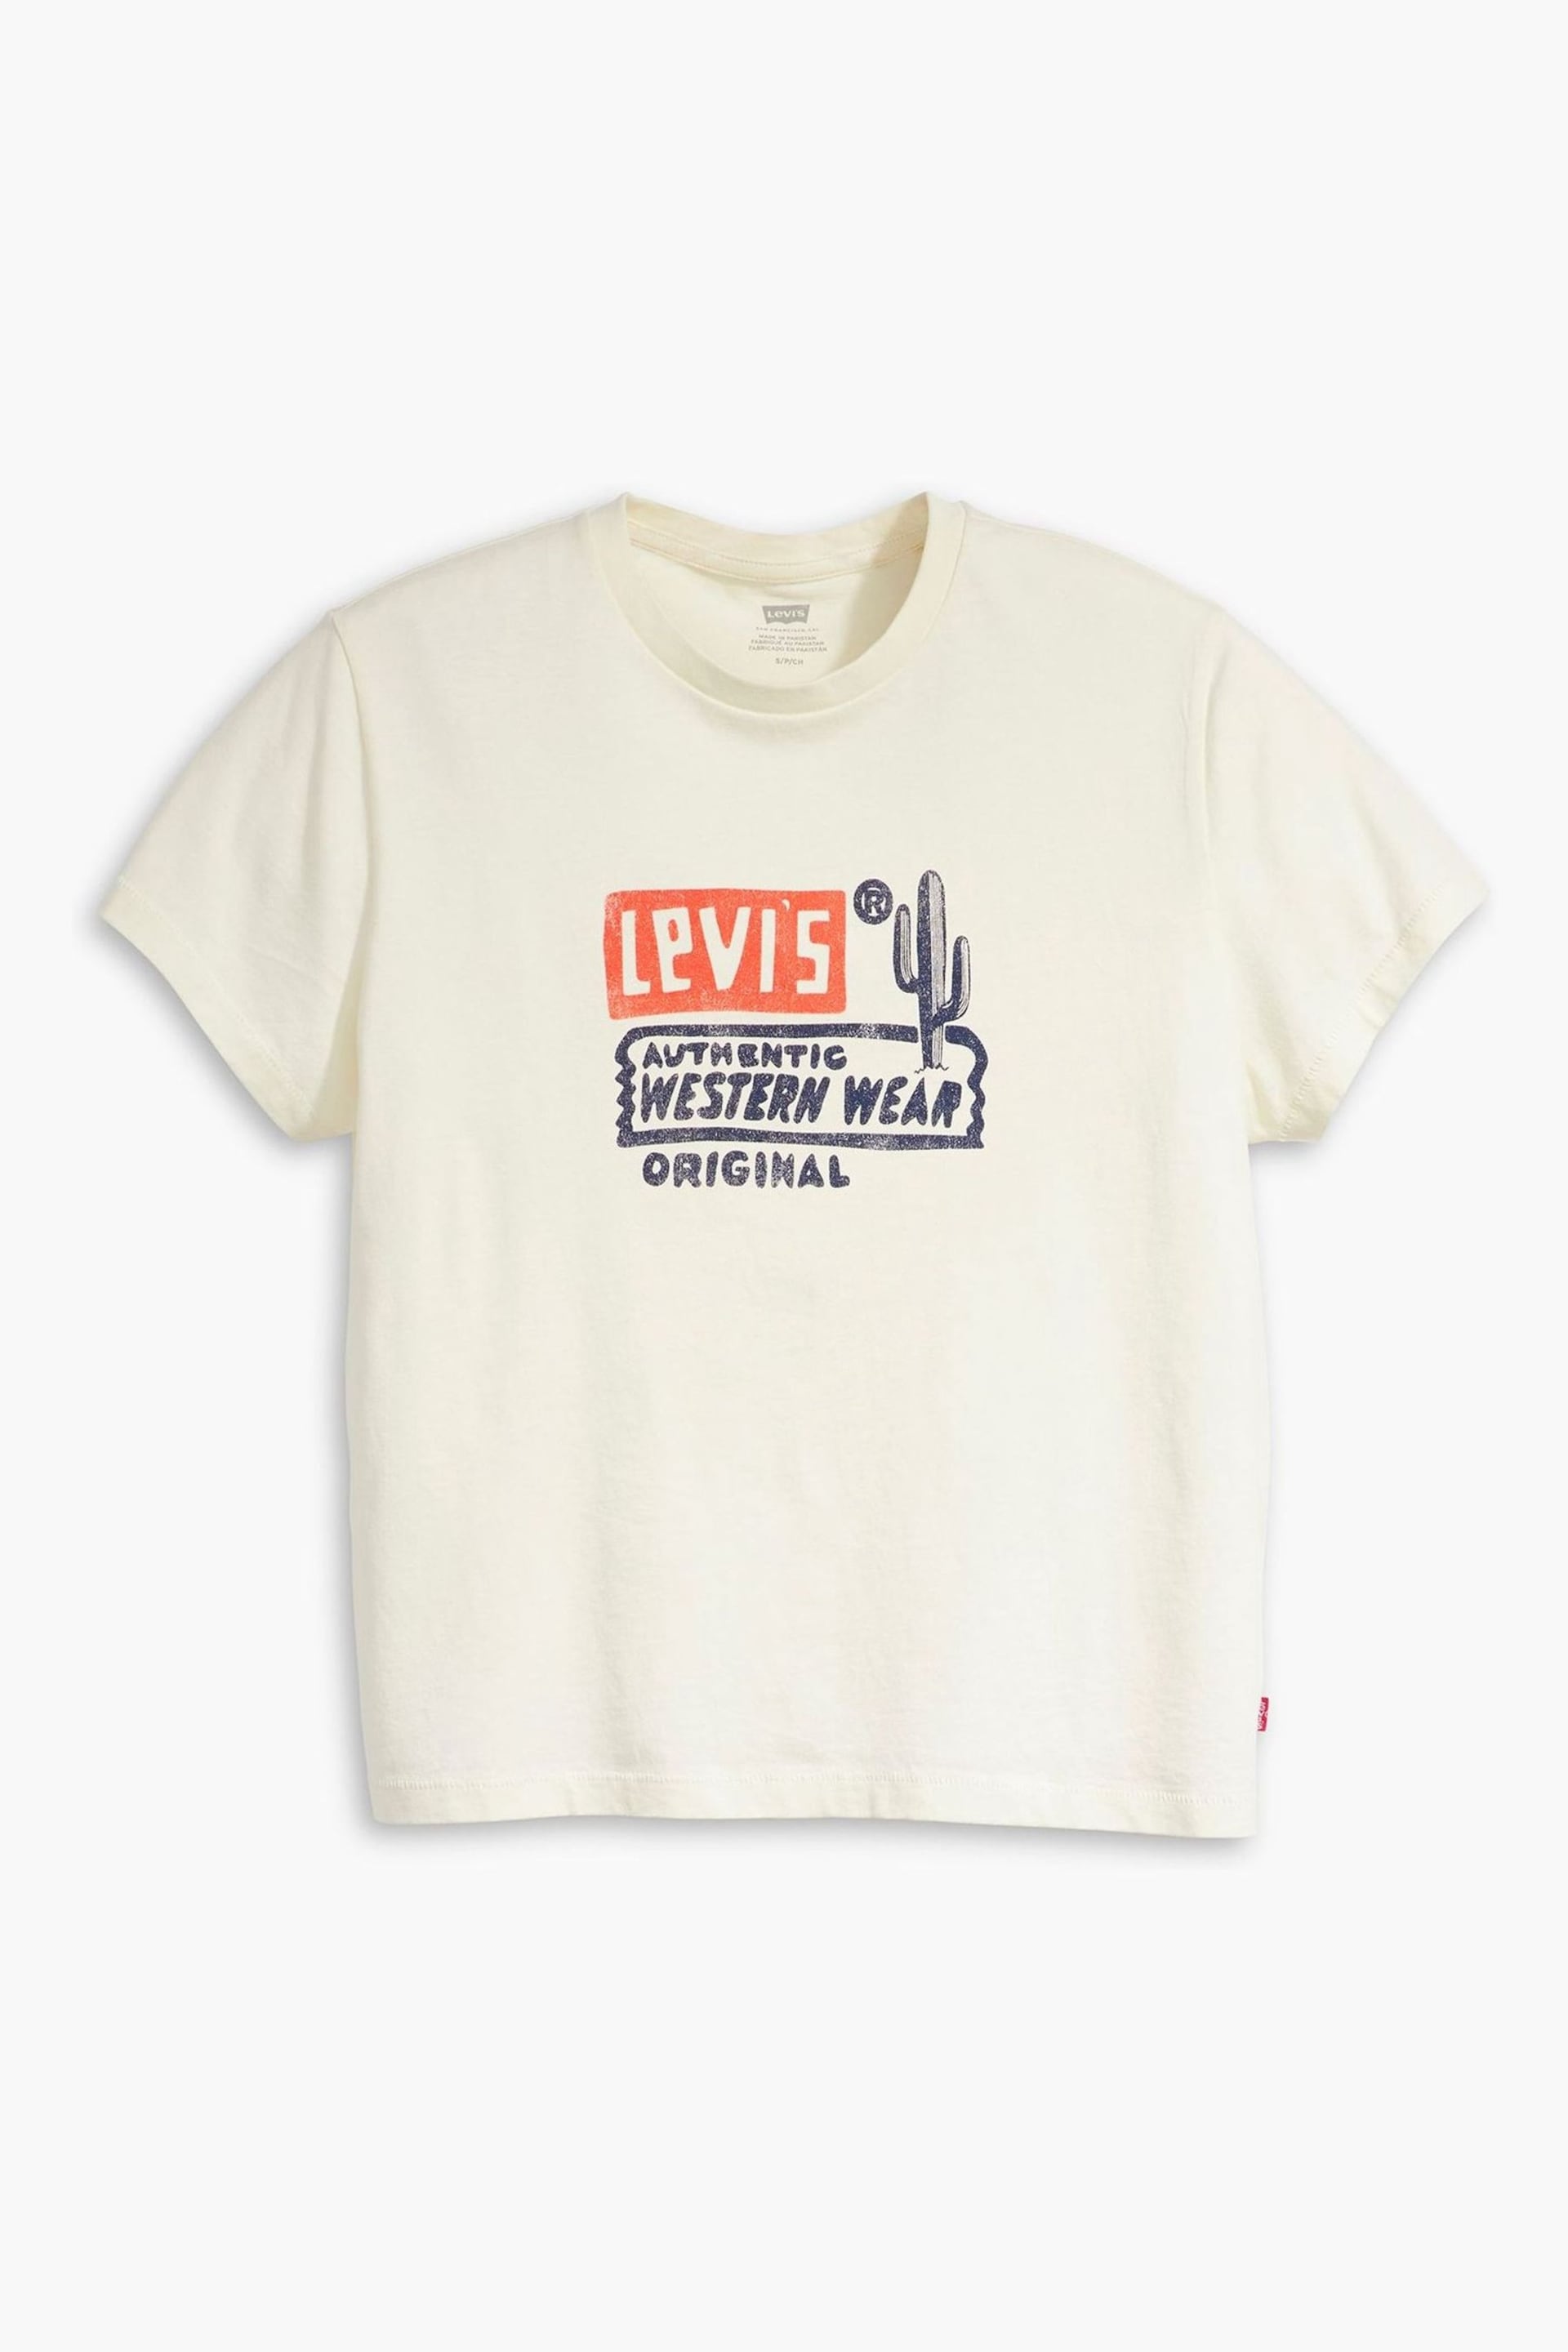 Levi's® Western Wear Egret Graphic Classic T-Shirt - Image 5 of 7